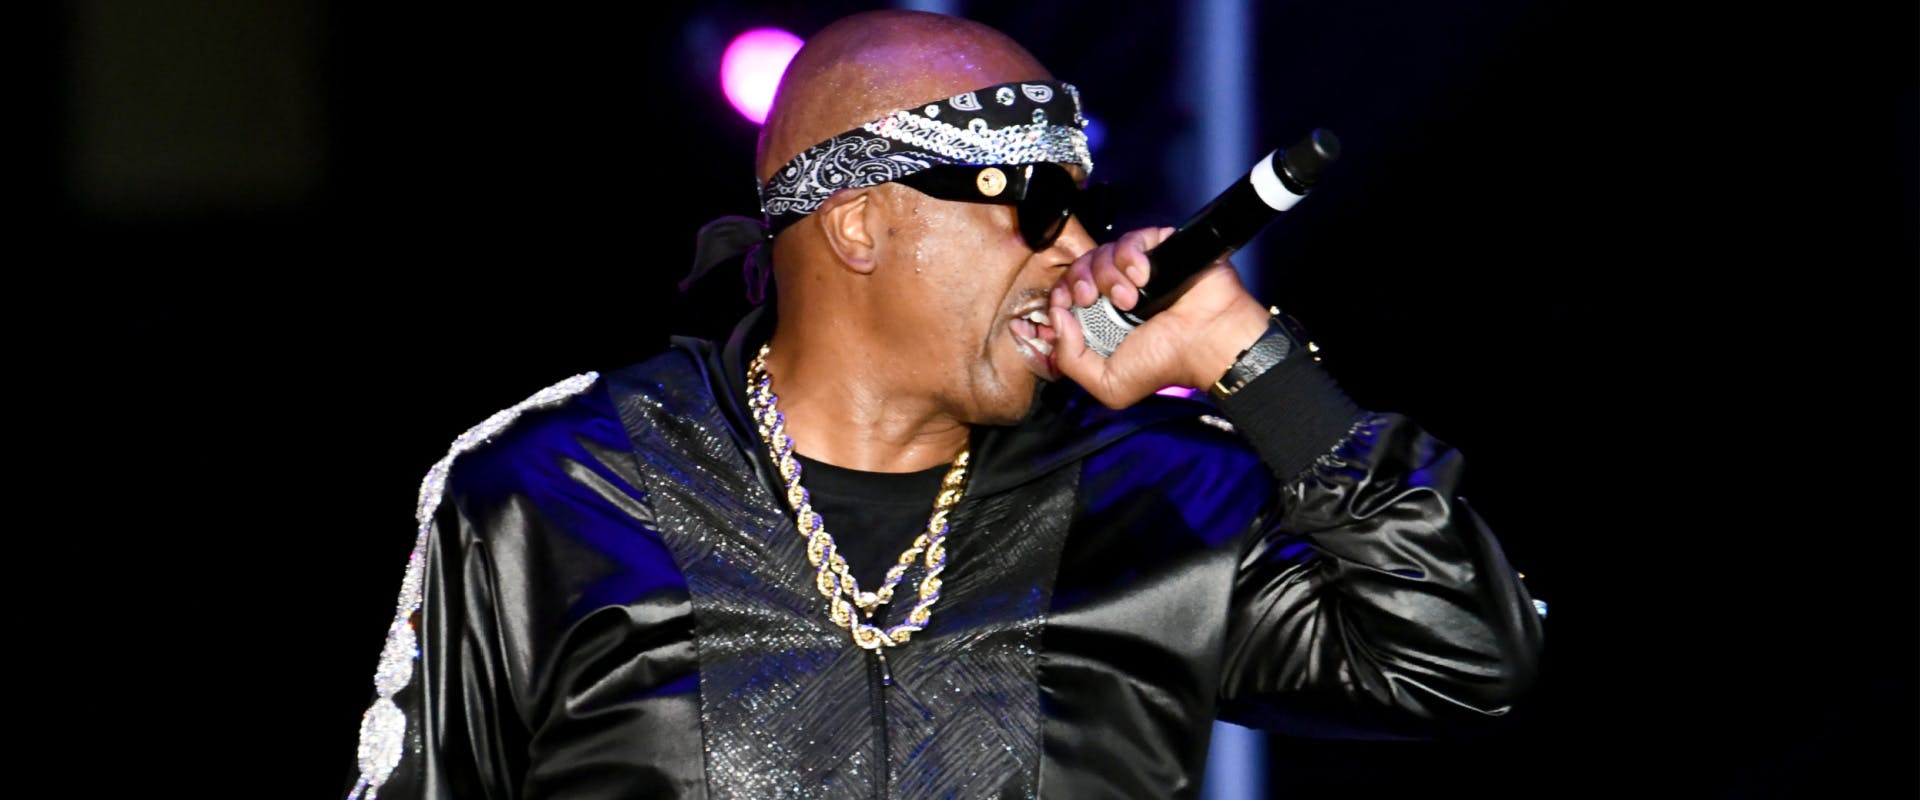 IRVINE, CALIFORNIA - JULY 13: Rapper MC Hammer performs onstage during Hammer's House Party at Five Point Amphitheater on July 13, 2019 in Irvine, California. (Photo by Scott Dudelson/Getty Images)